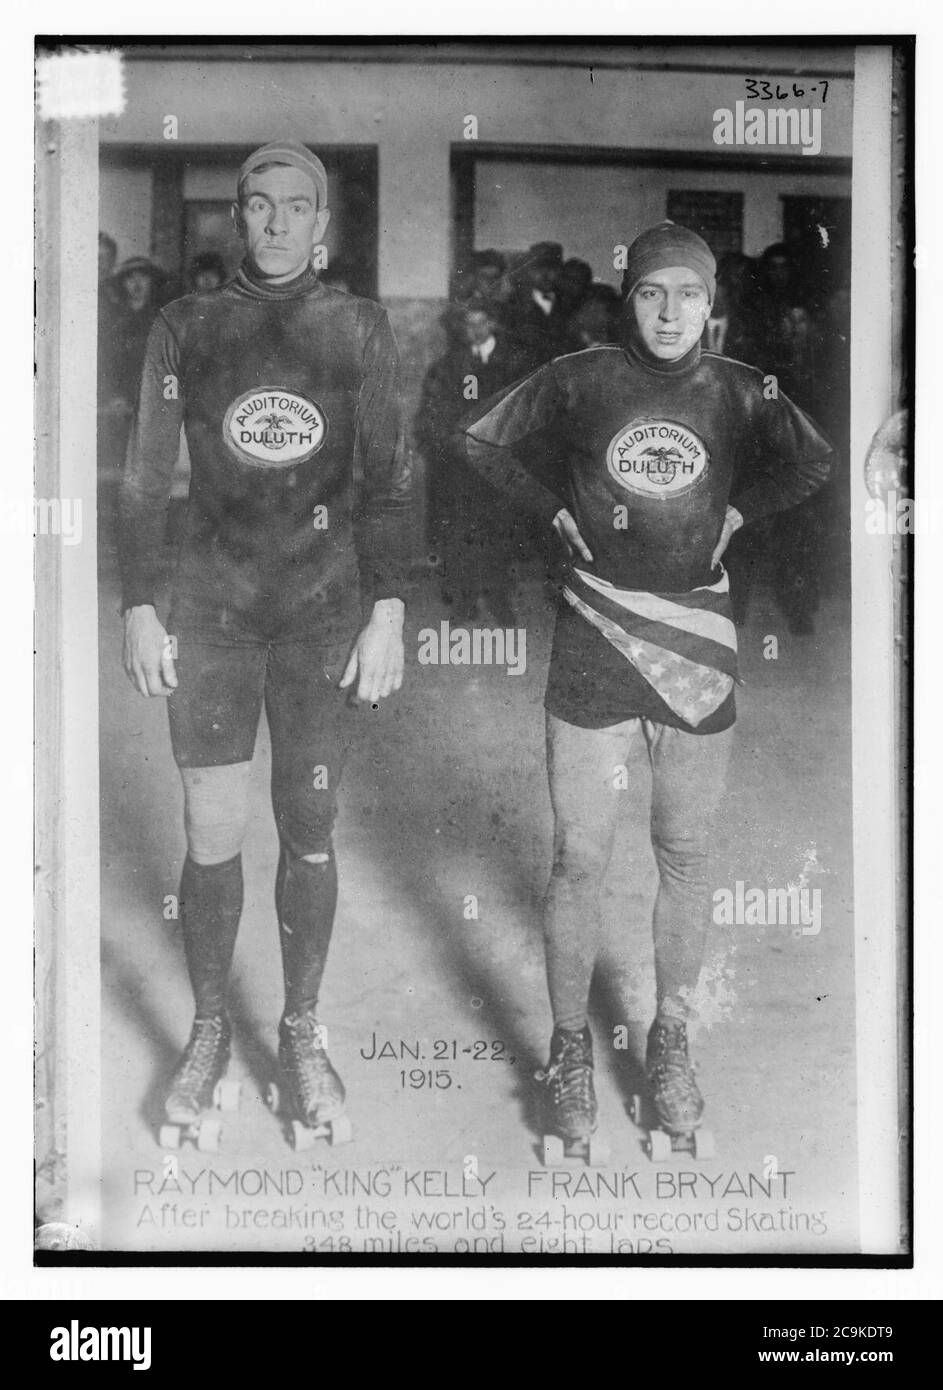 Jan. 21-22, 1915 - Raymond ‘King‘ Kelly, Frank Bryant - After breaking the World's 24 hour record skating 348 miles and 8 laps (on the ice - Duluth) Stock Photo